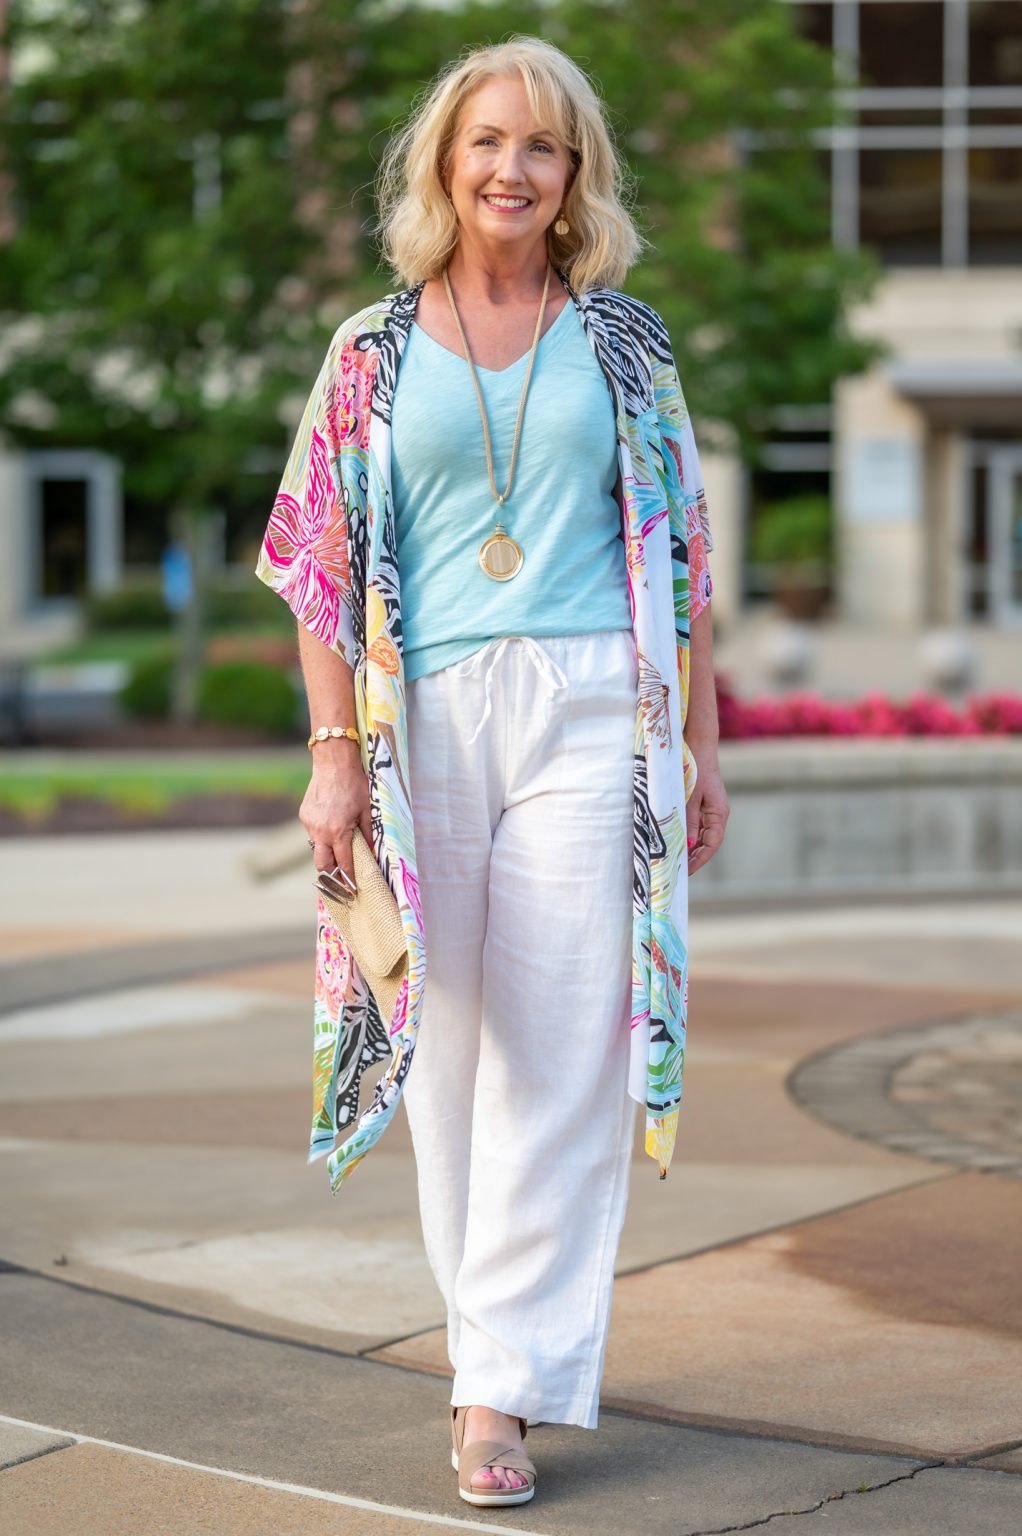 Colorful Summer Ruana & Linen Pants - Dressed for My Day